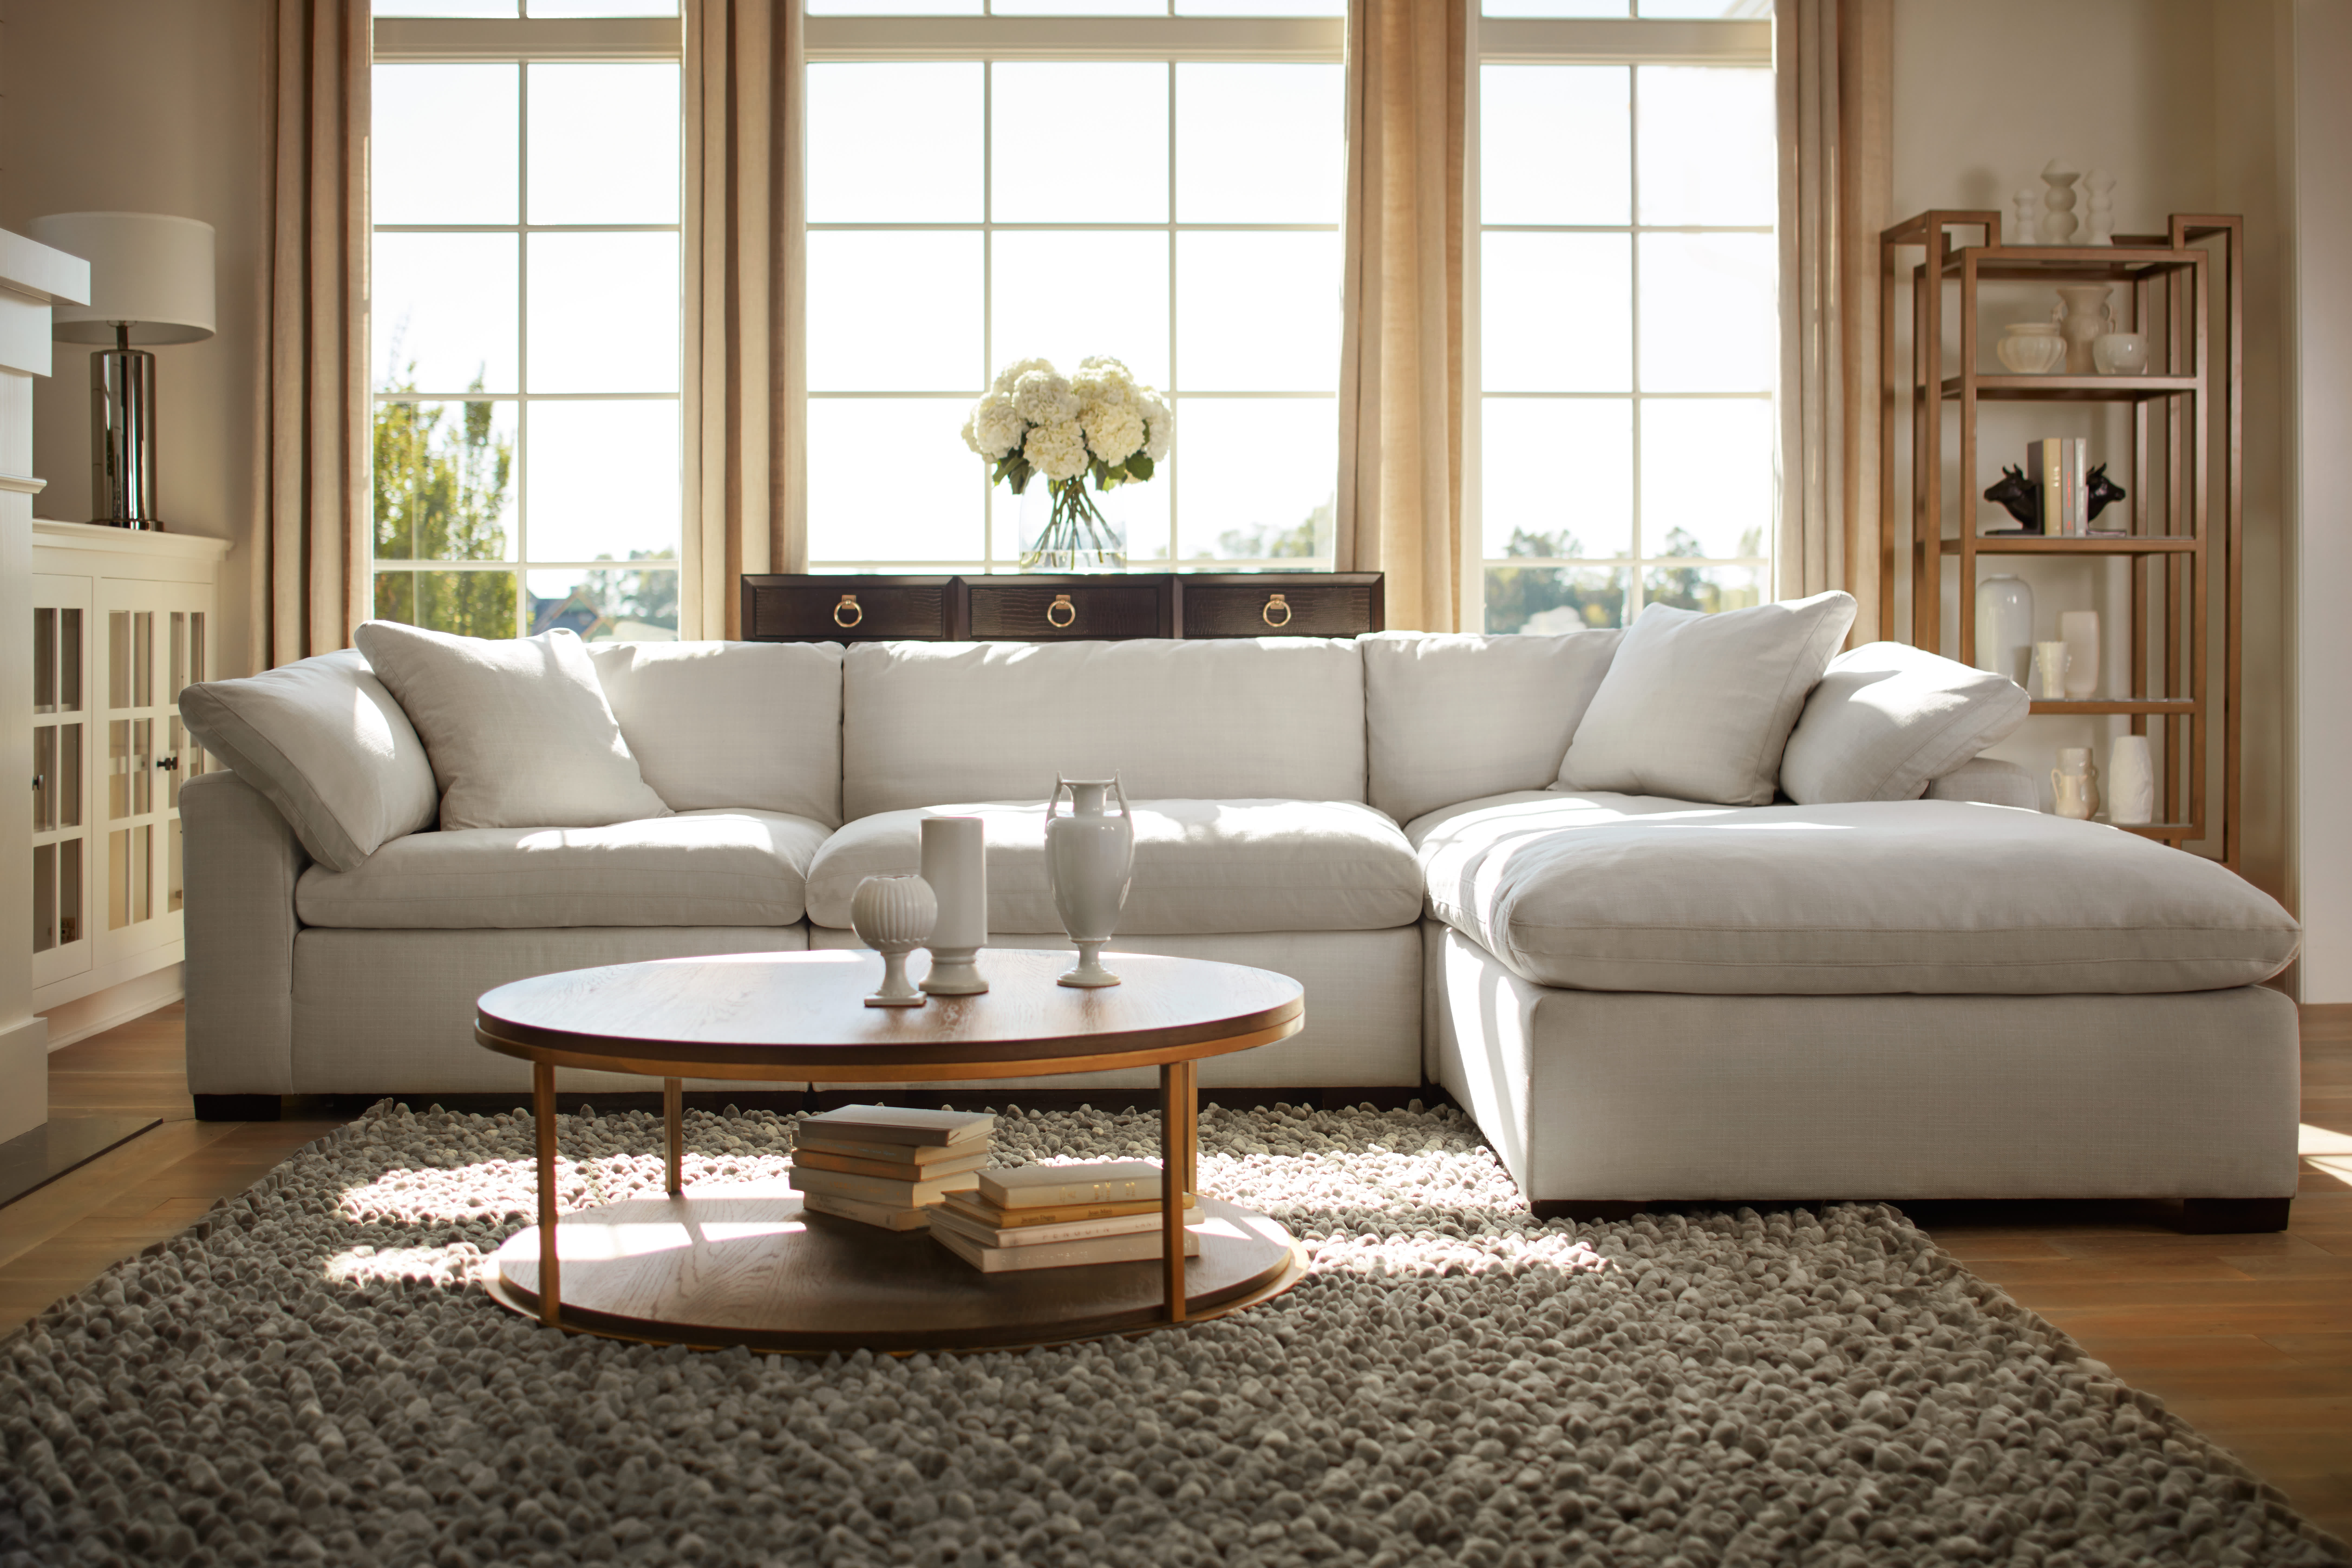 How to Keep a Sofa Sectional From Sliding Flemington Dept Store Blog